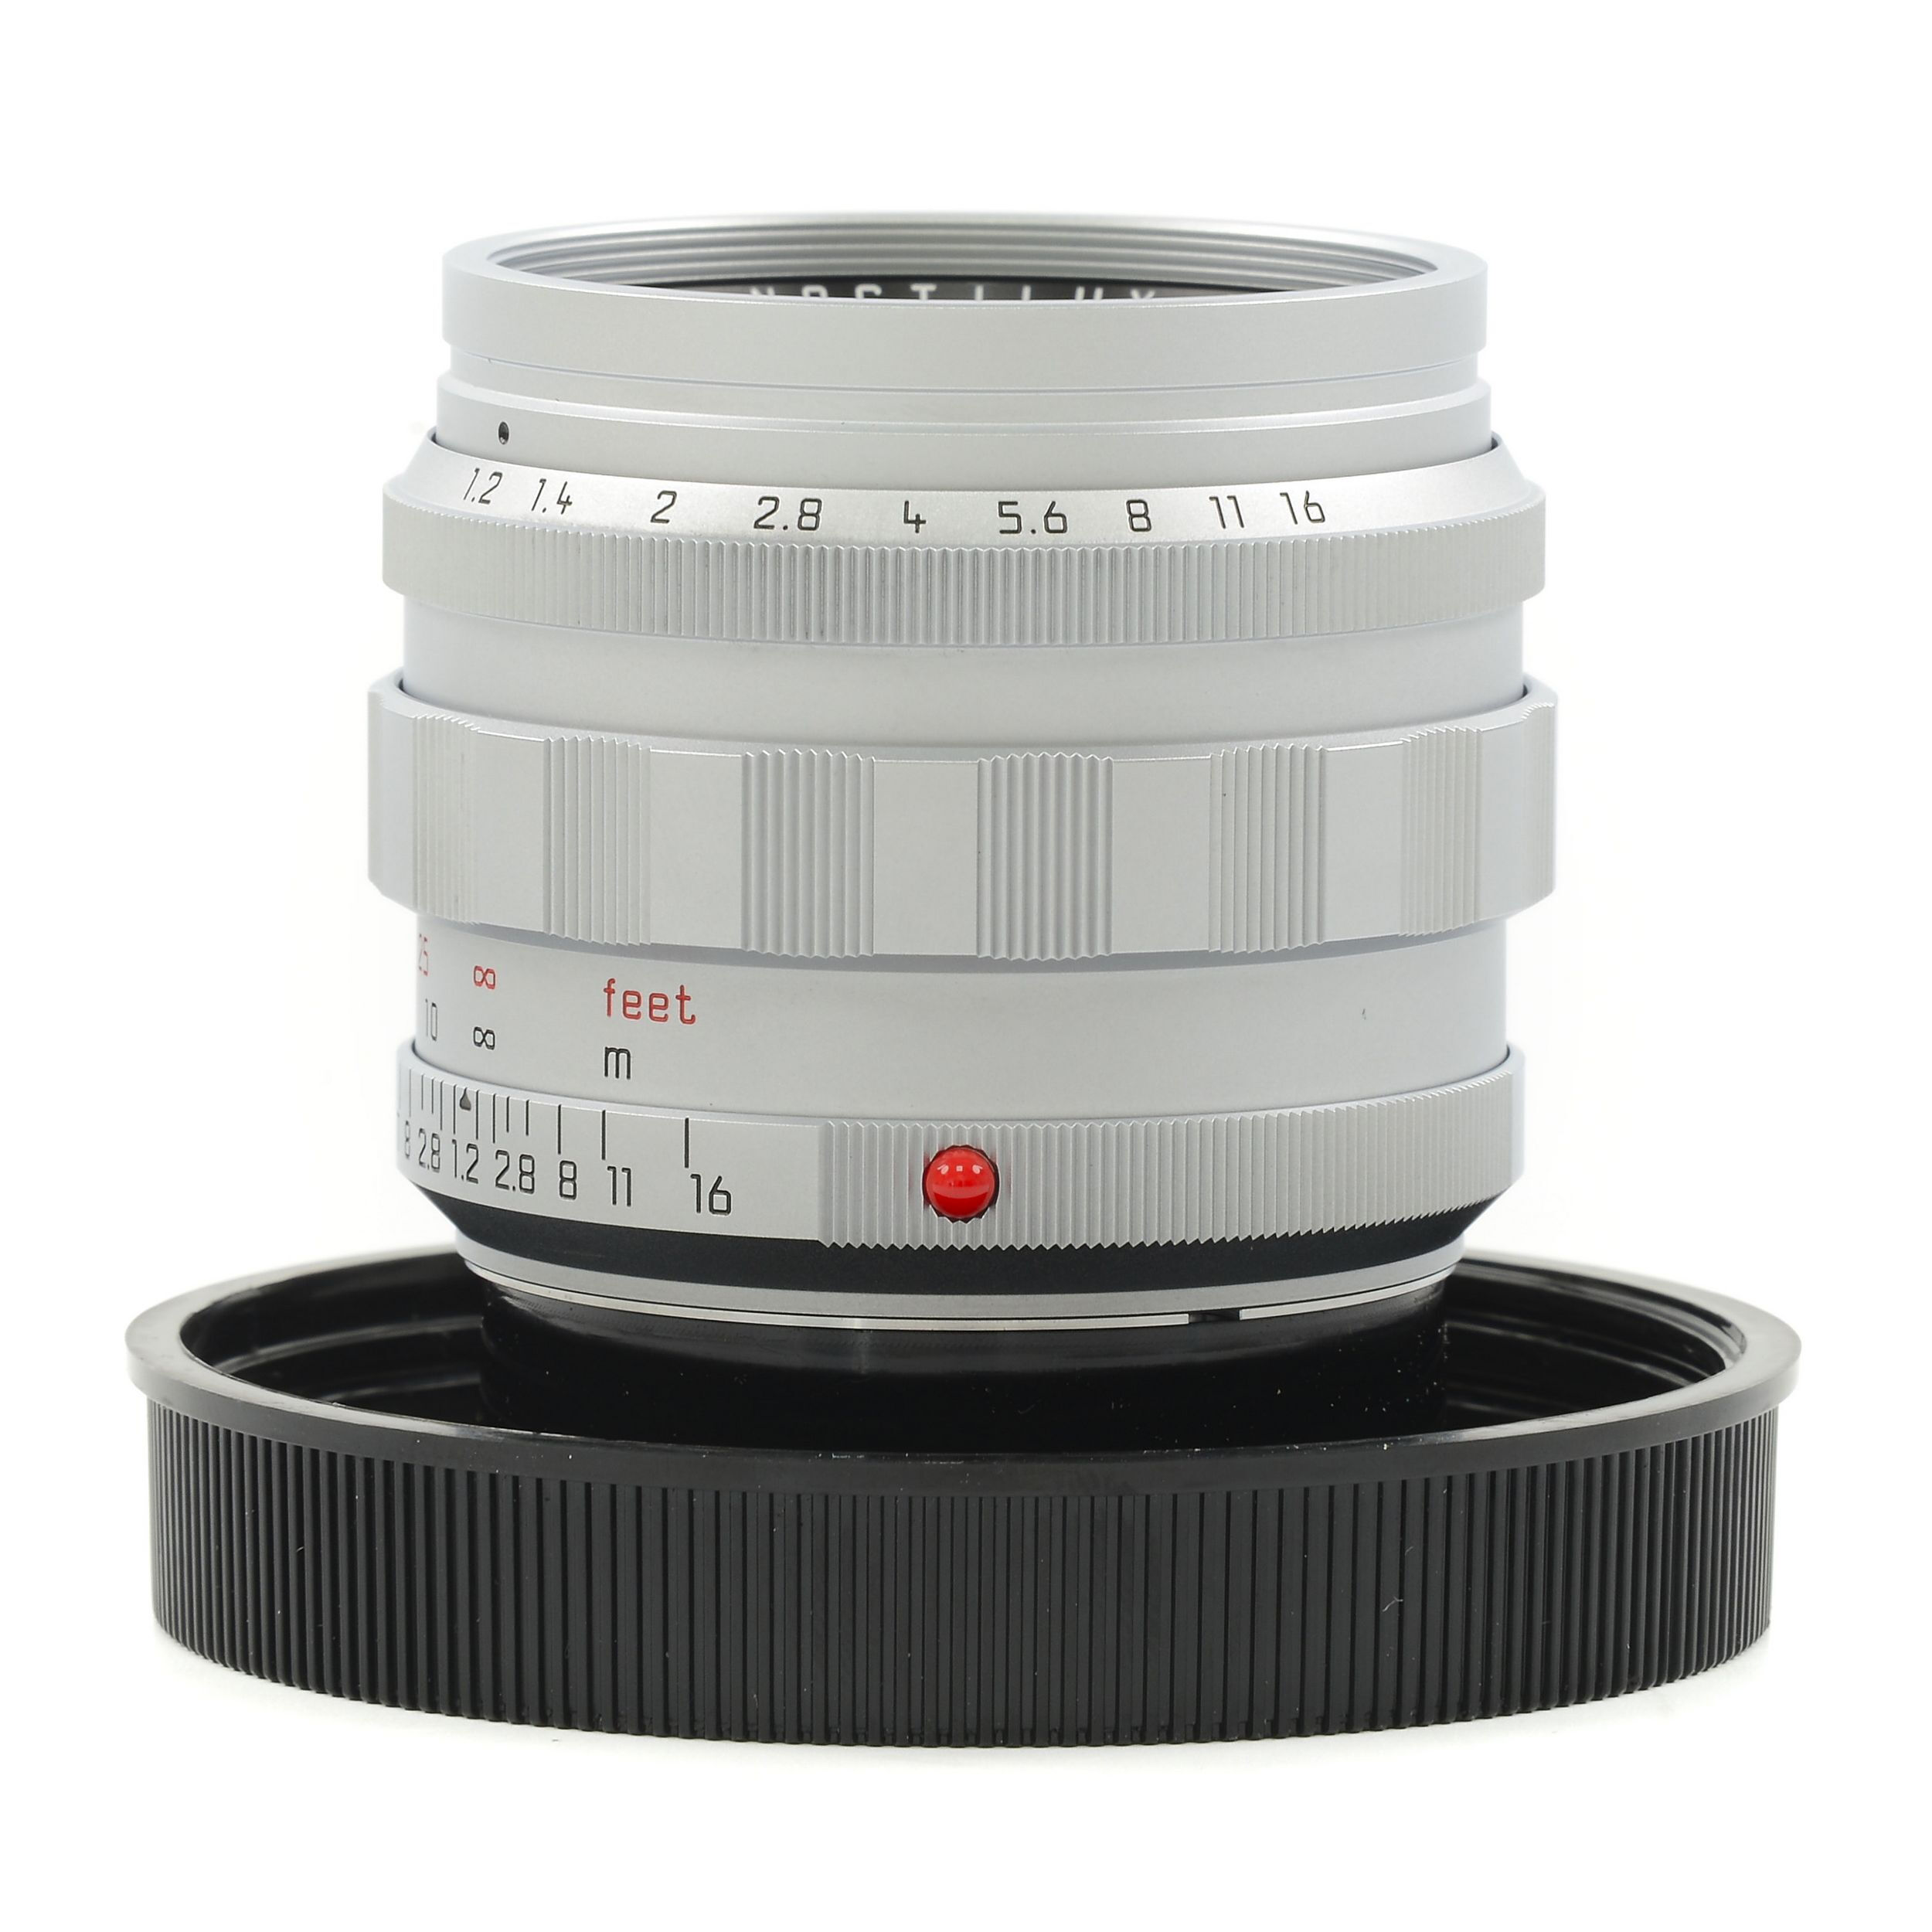 LEICA 50MM F1.2 NOCTILUX-M ASPH SILVER + BOX EXTREMELY RARE 11702 #3210